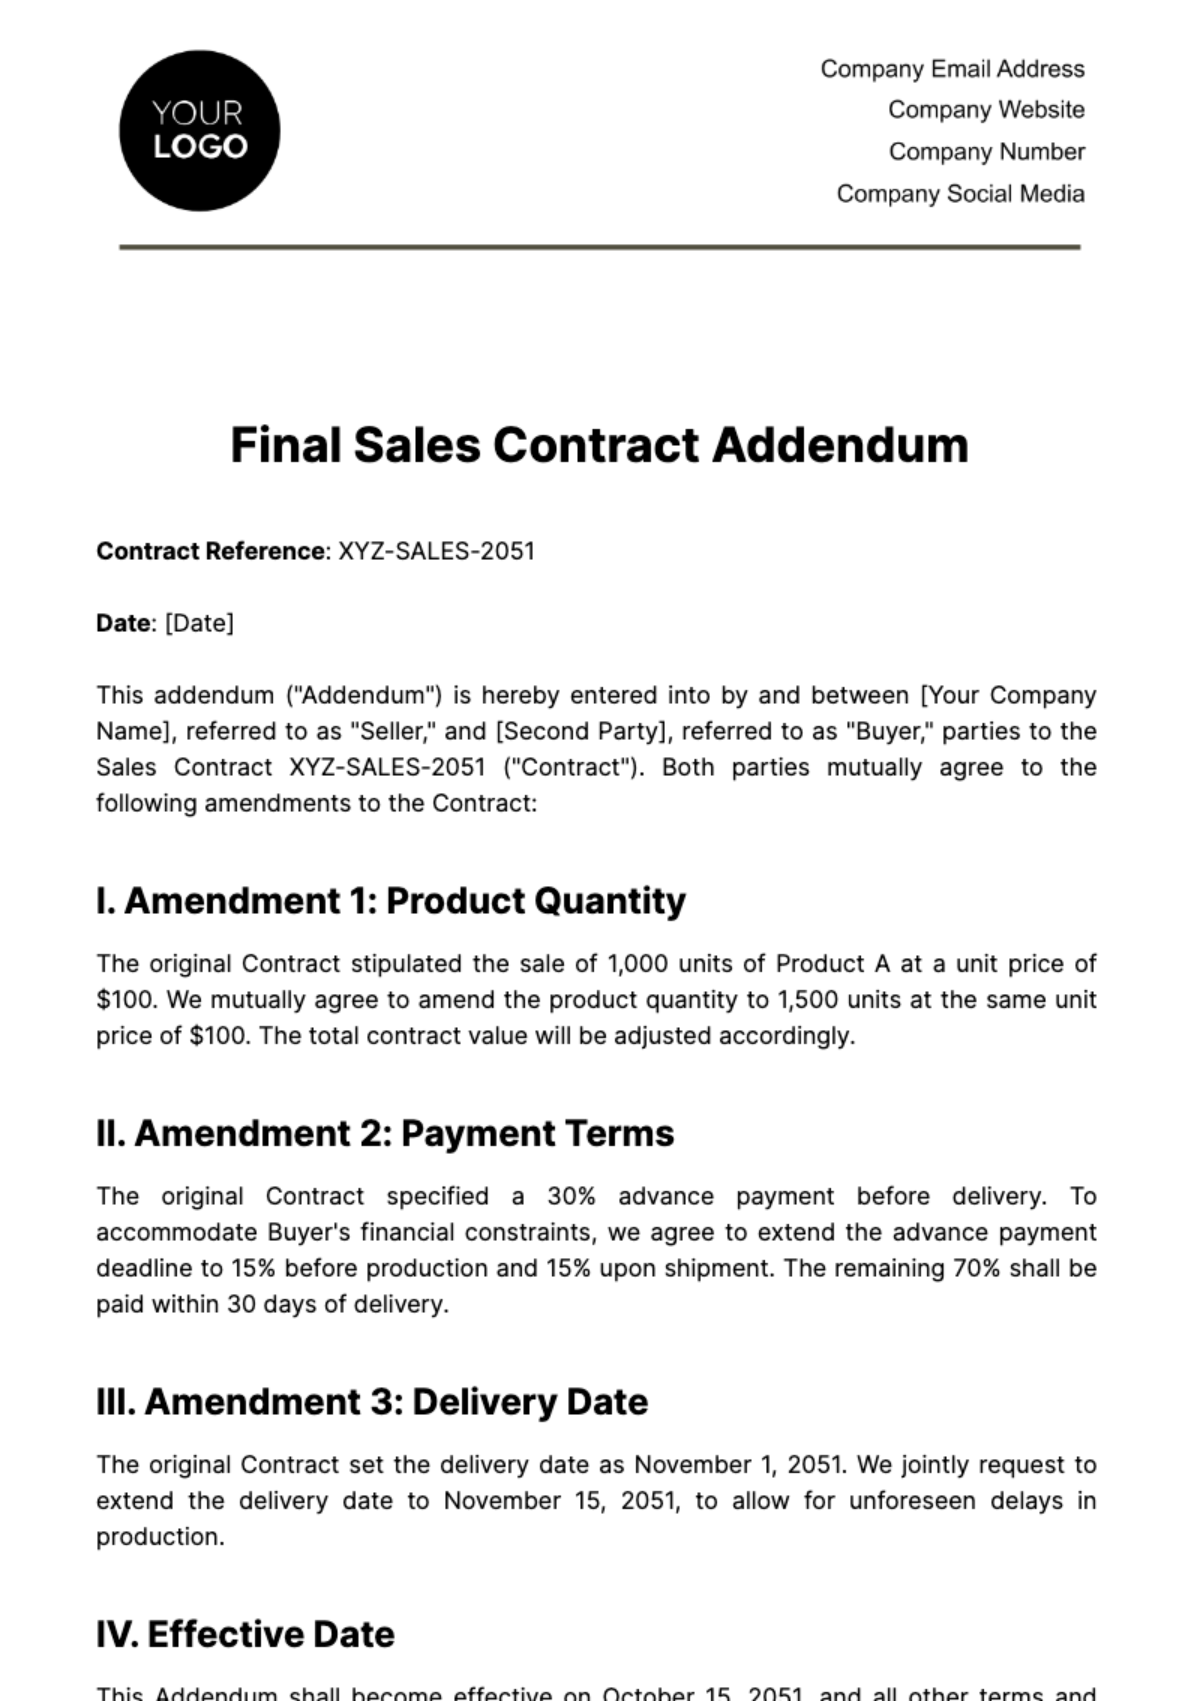 Free Sales Final Sales Contract Addendum Template